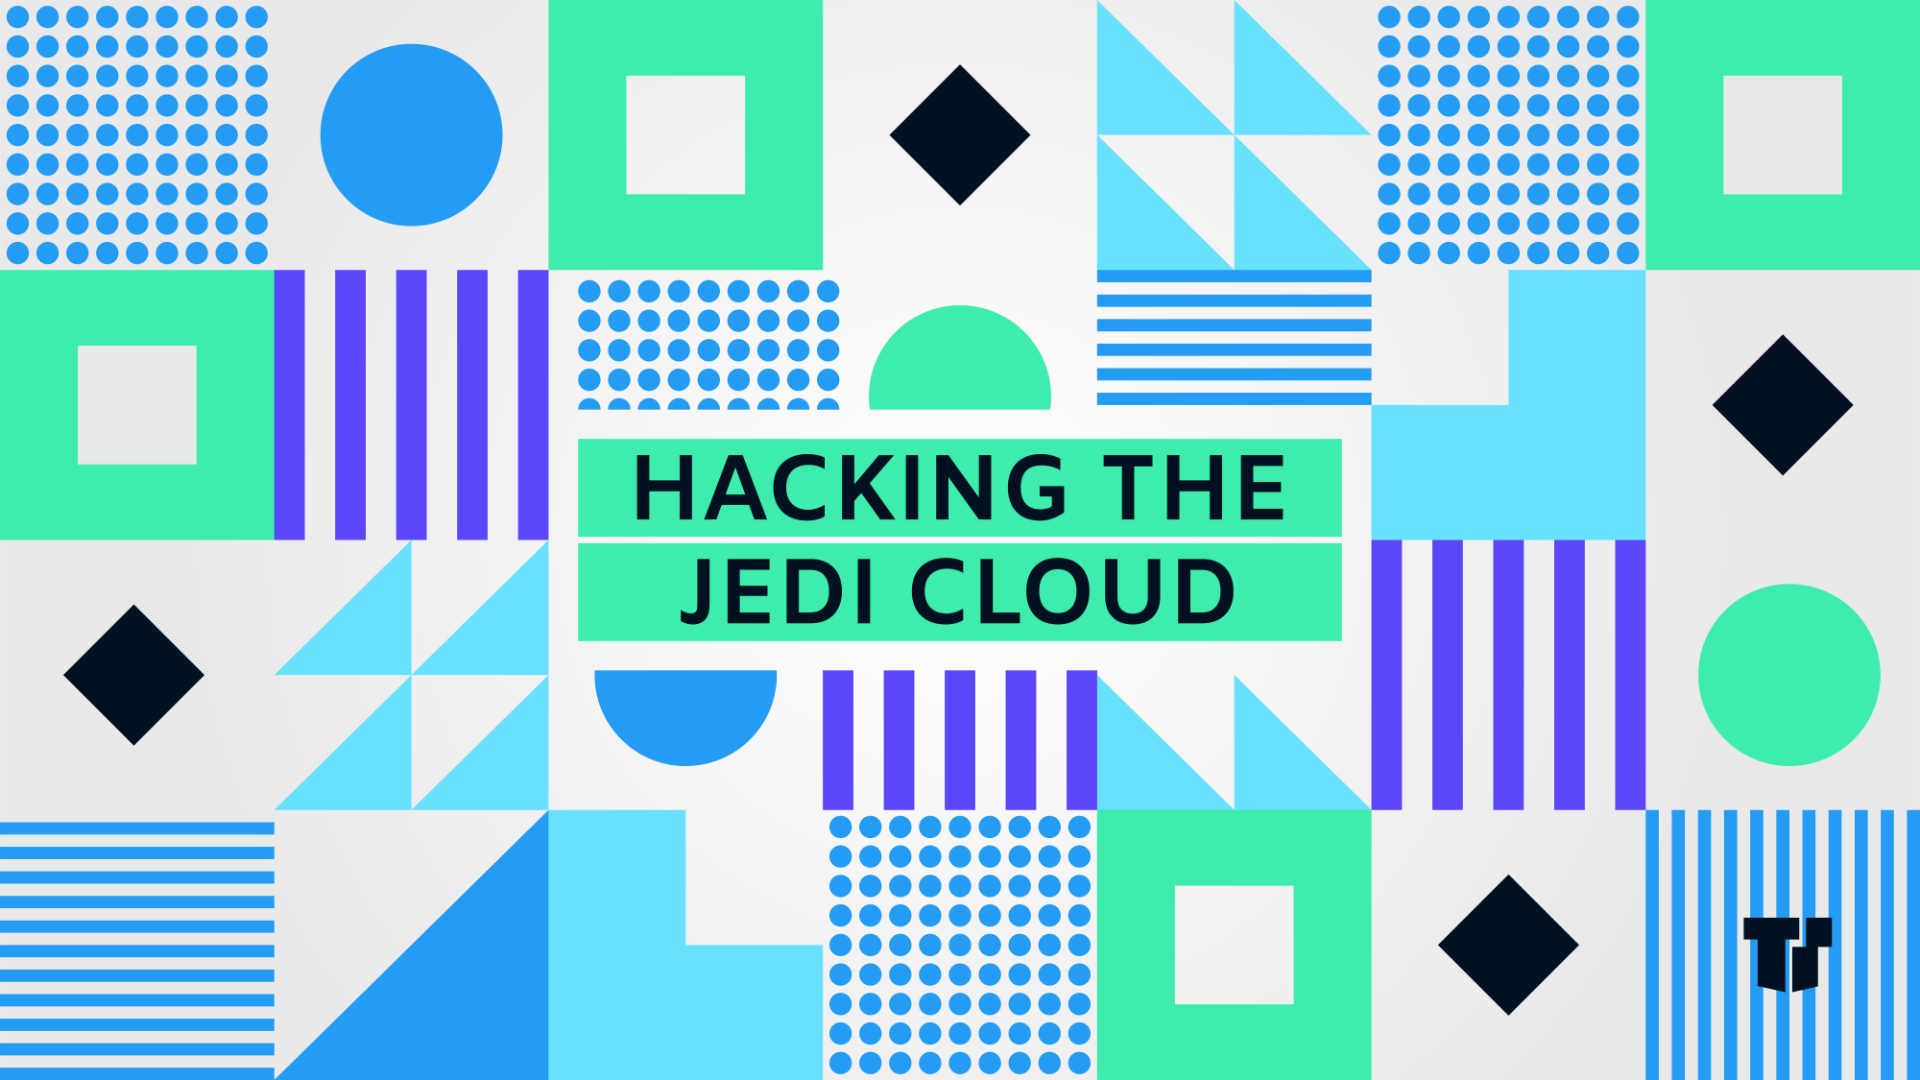 Hacking the JEDI Cloud cover image